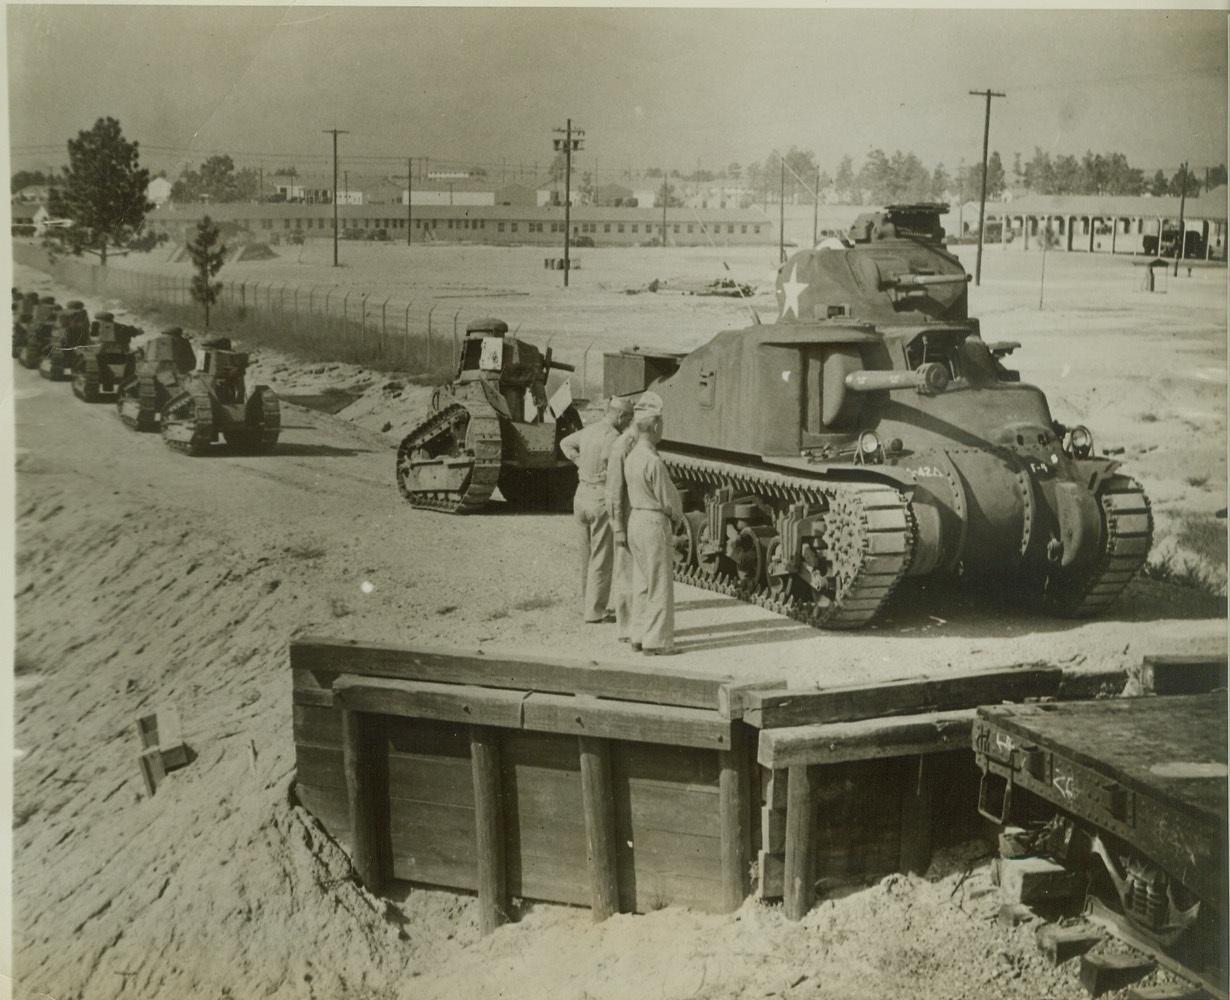 First World War Tanks Go to Scrap Heap, 10/5/1942. CAMP POLK, LA. – Like a mother caterpillar leading her youngsters, this modern medium American Armored Force tank starts Renault tanks of World War I on their trip to the blast furnace, where they will be converted into more modern war materials. The tanks were salvaged at Camp Polk, home of the 111 Armored Corps. Credit: (ACME);